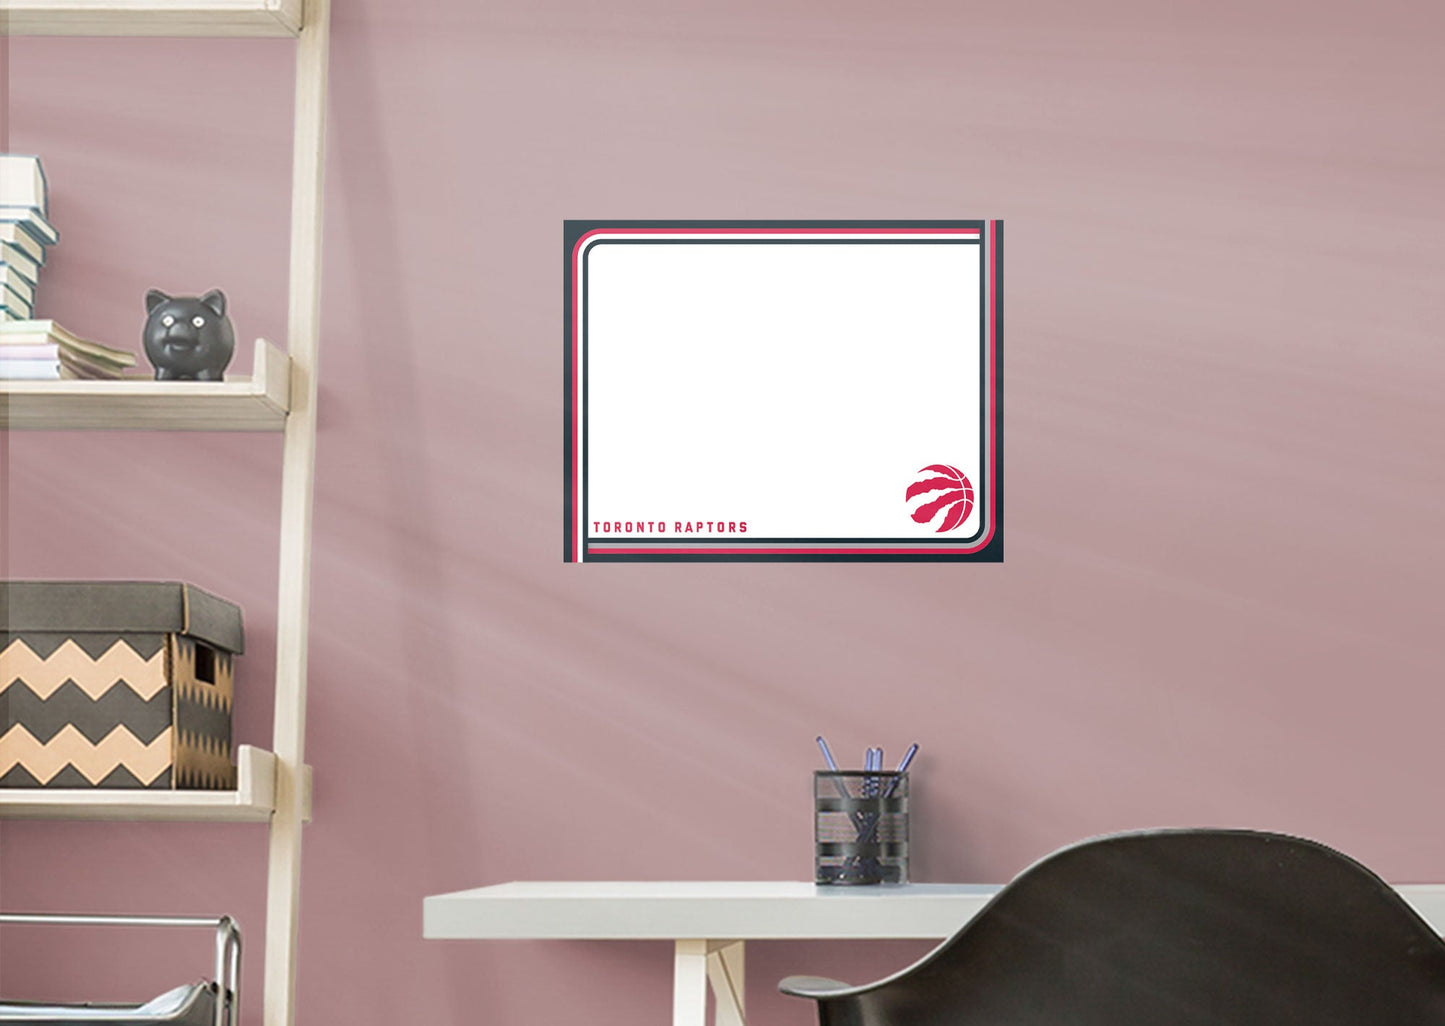 Toronto Raptors:   DRY ERASE Whiteboard        - Officially Licensed NBA Removable Wall   Adhesive Decal